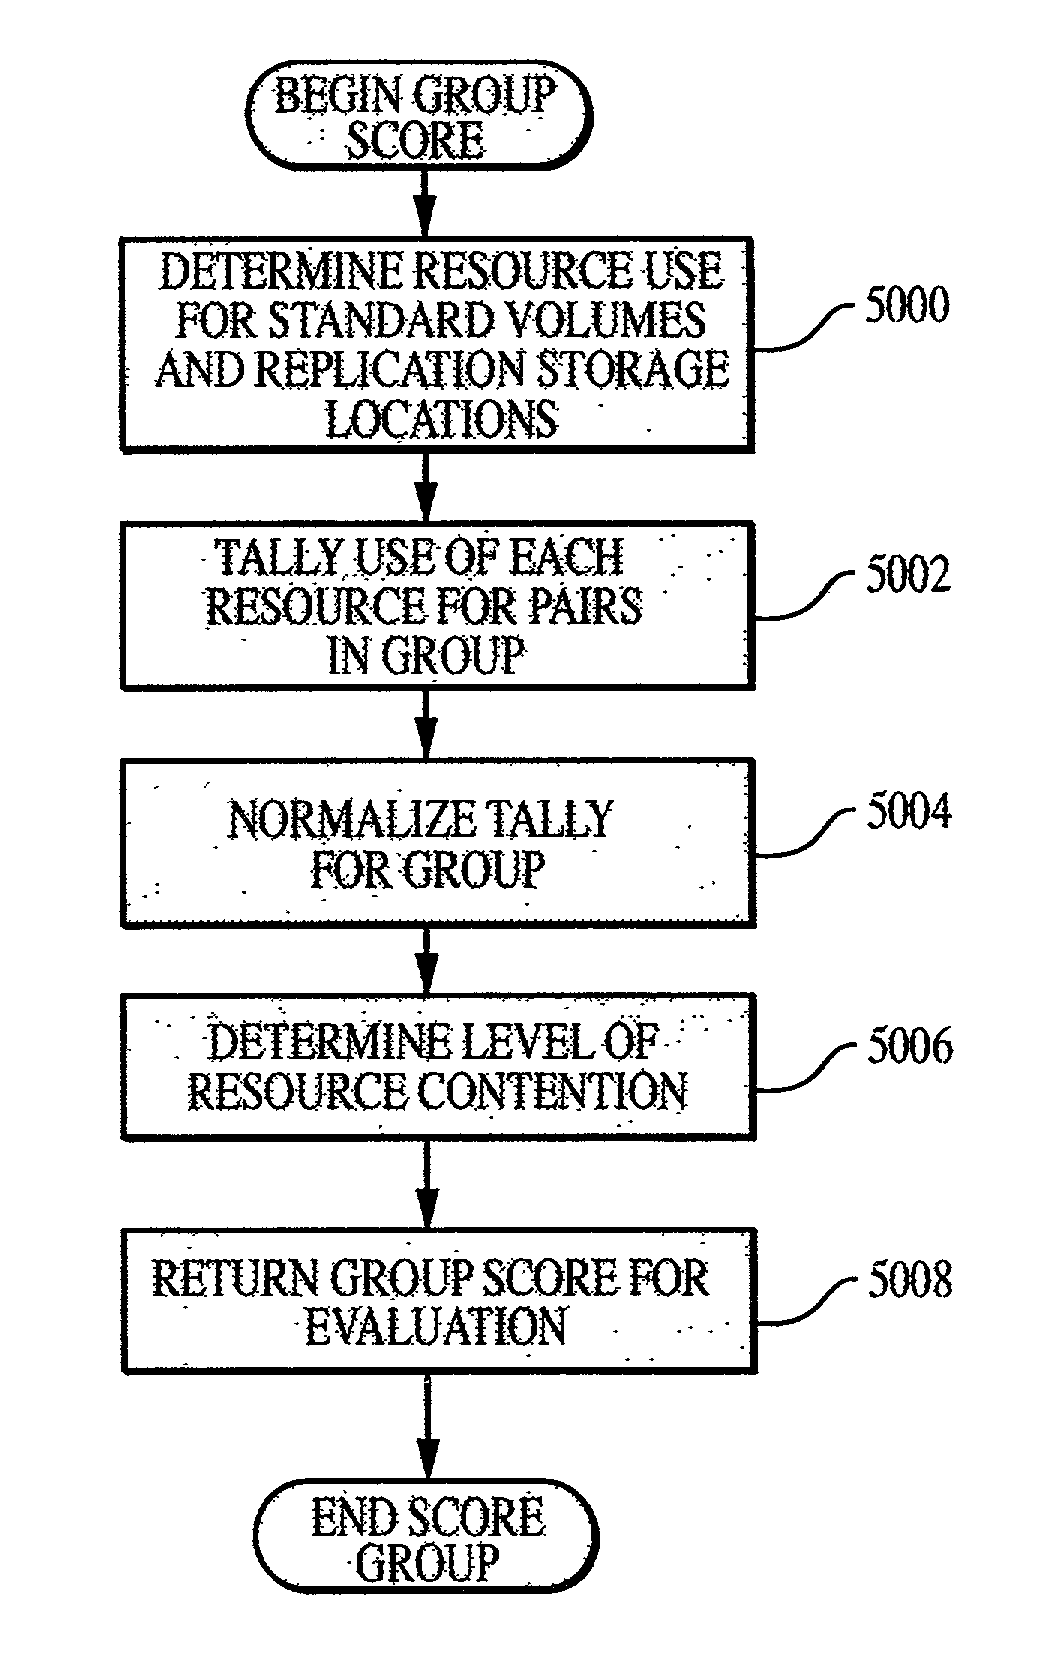 Information replication system having automated replication storage